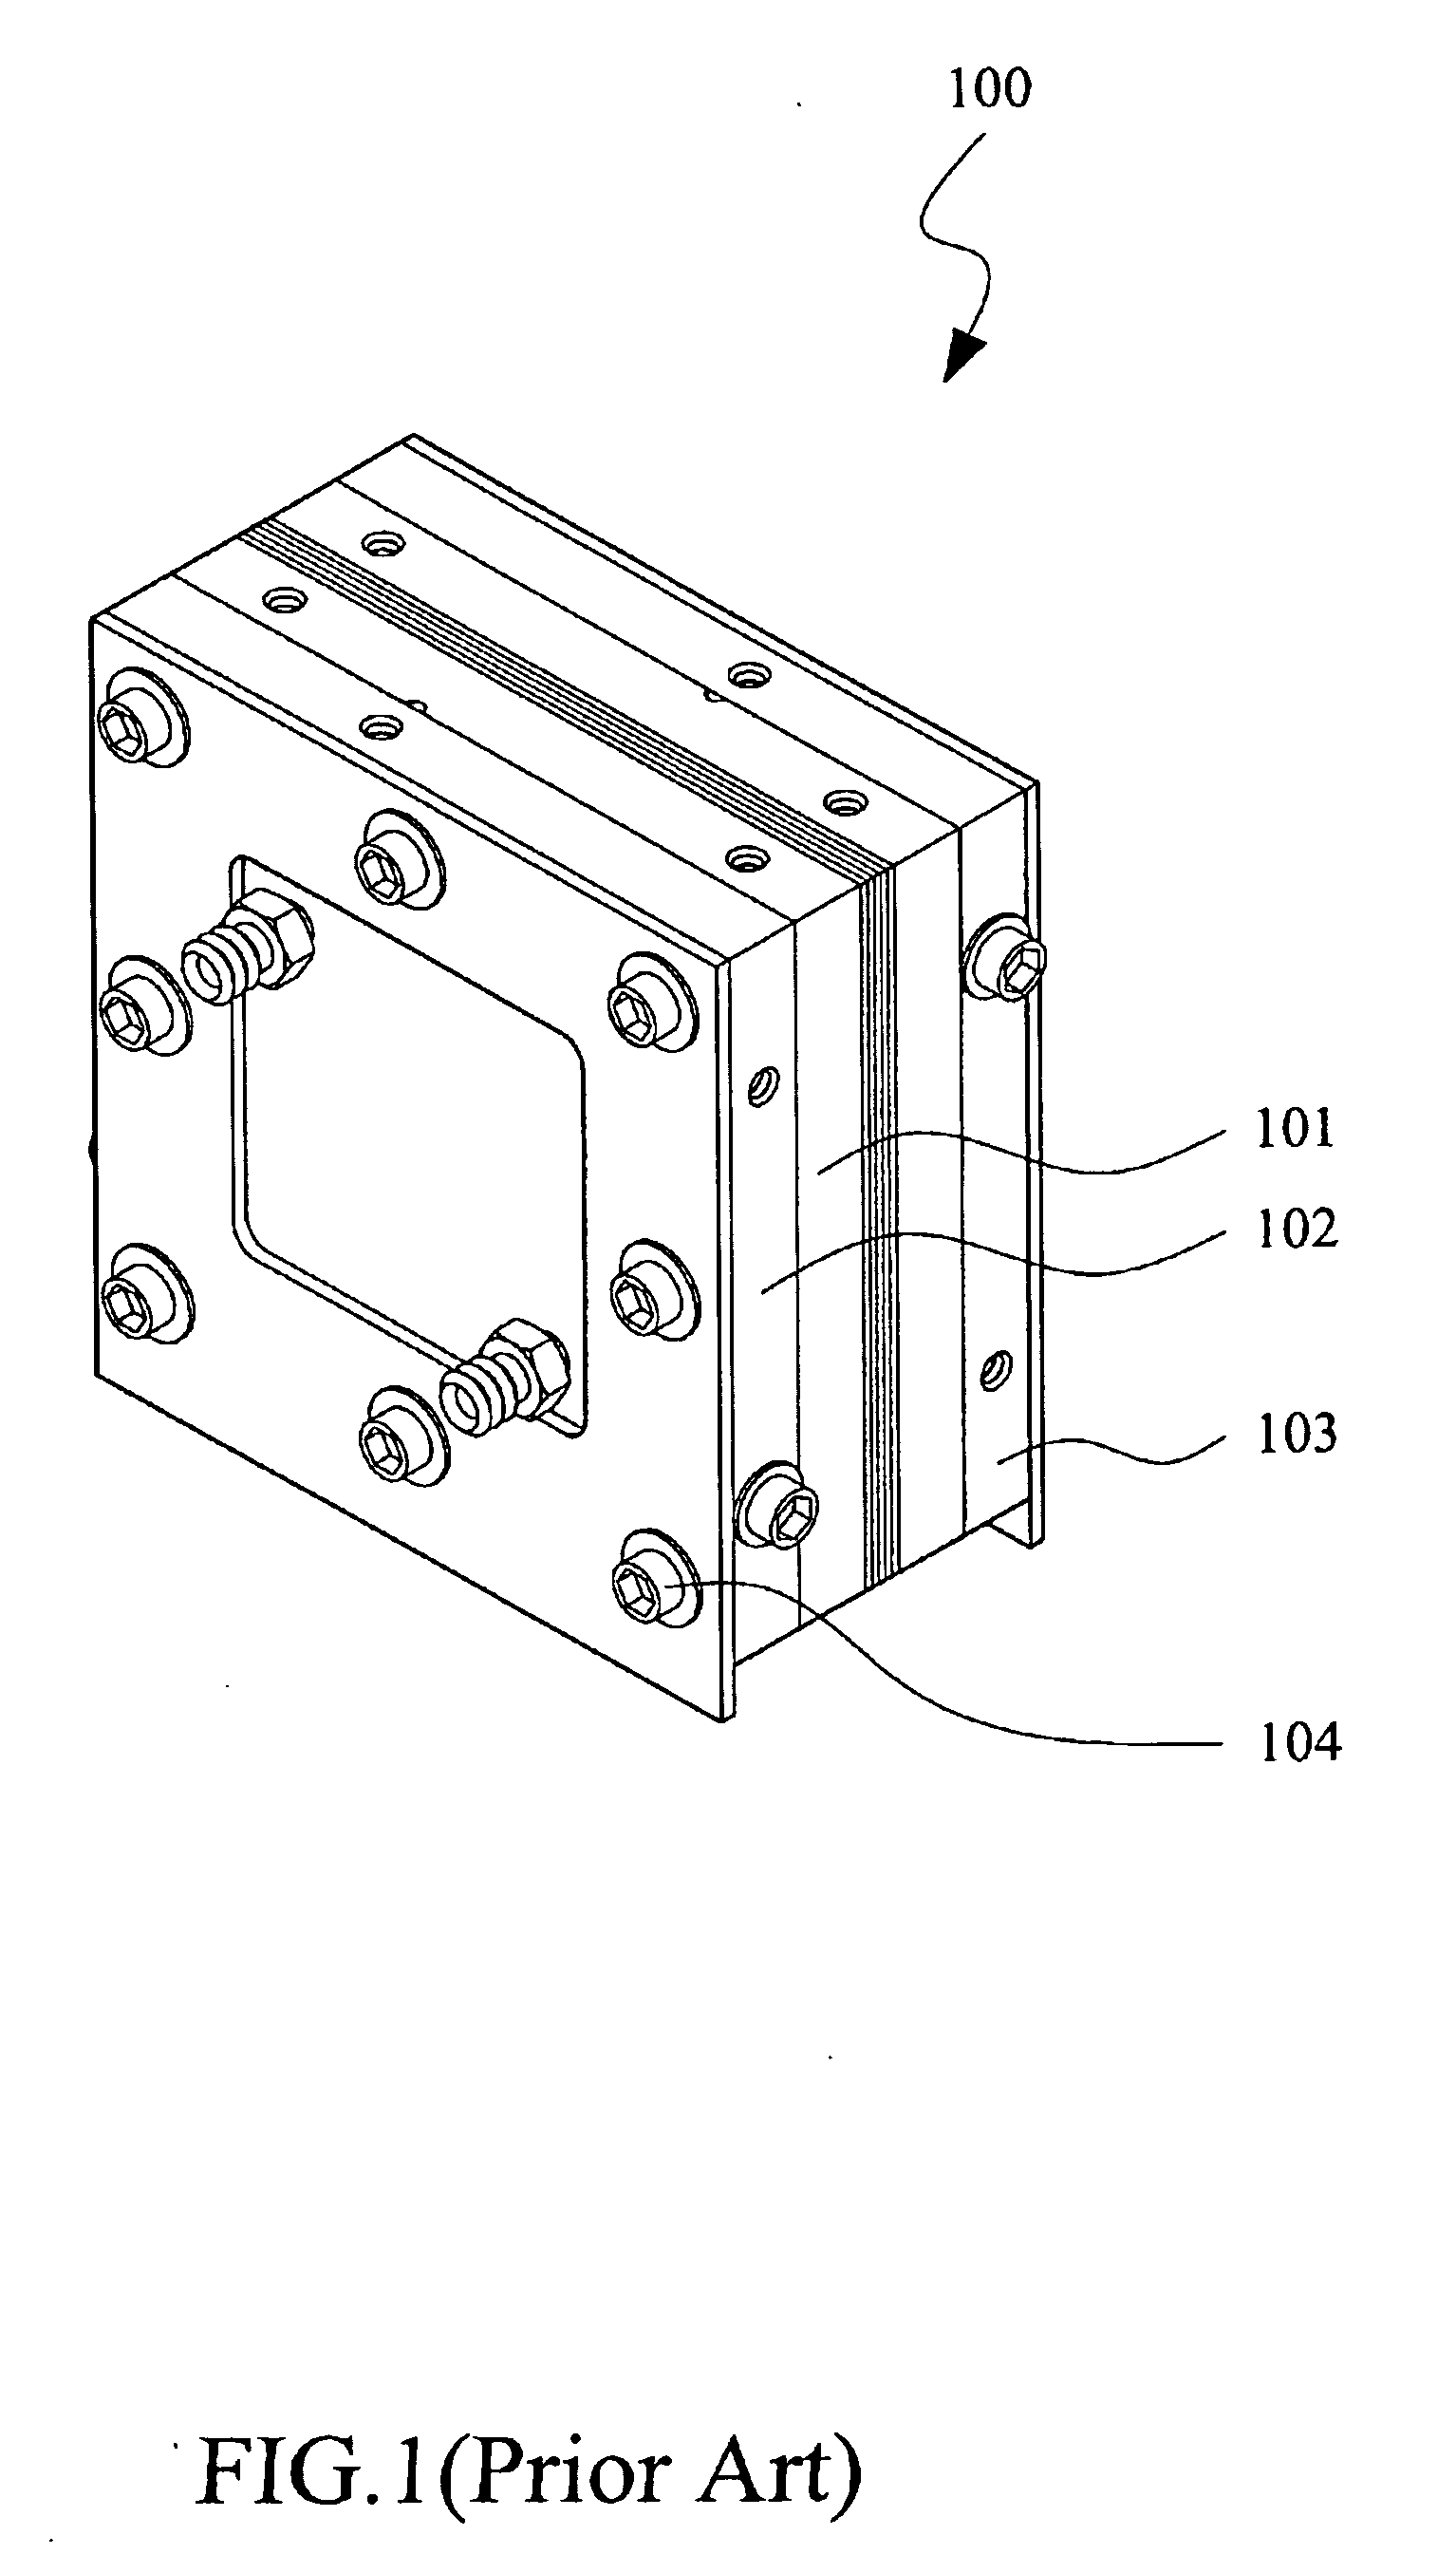 Pressure-adjustable fixture for fuel cell unit testing